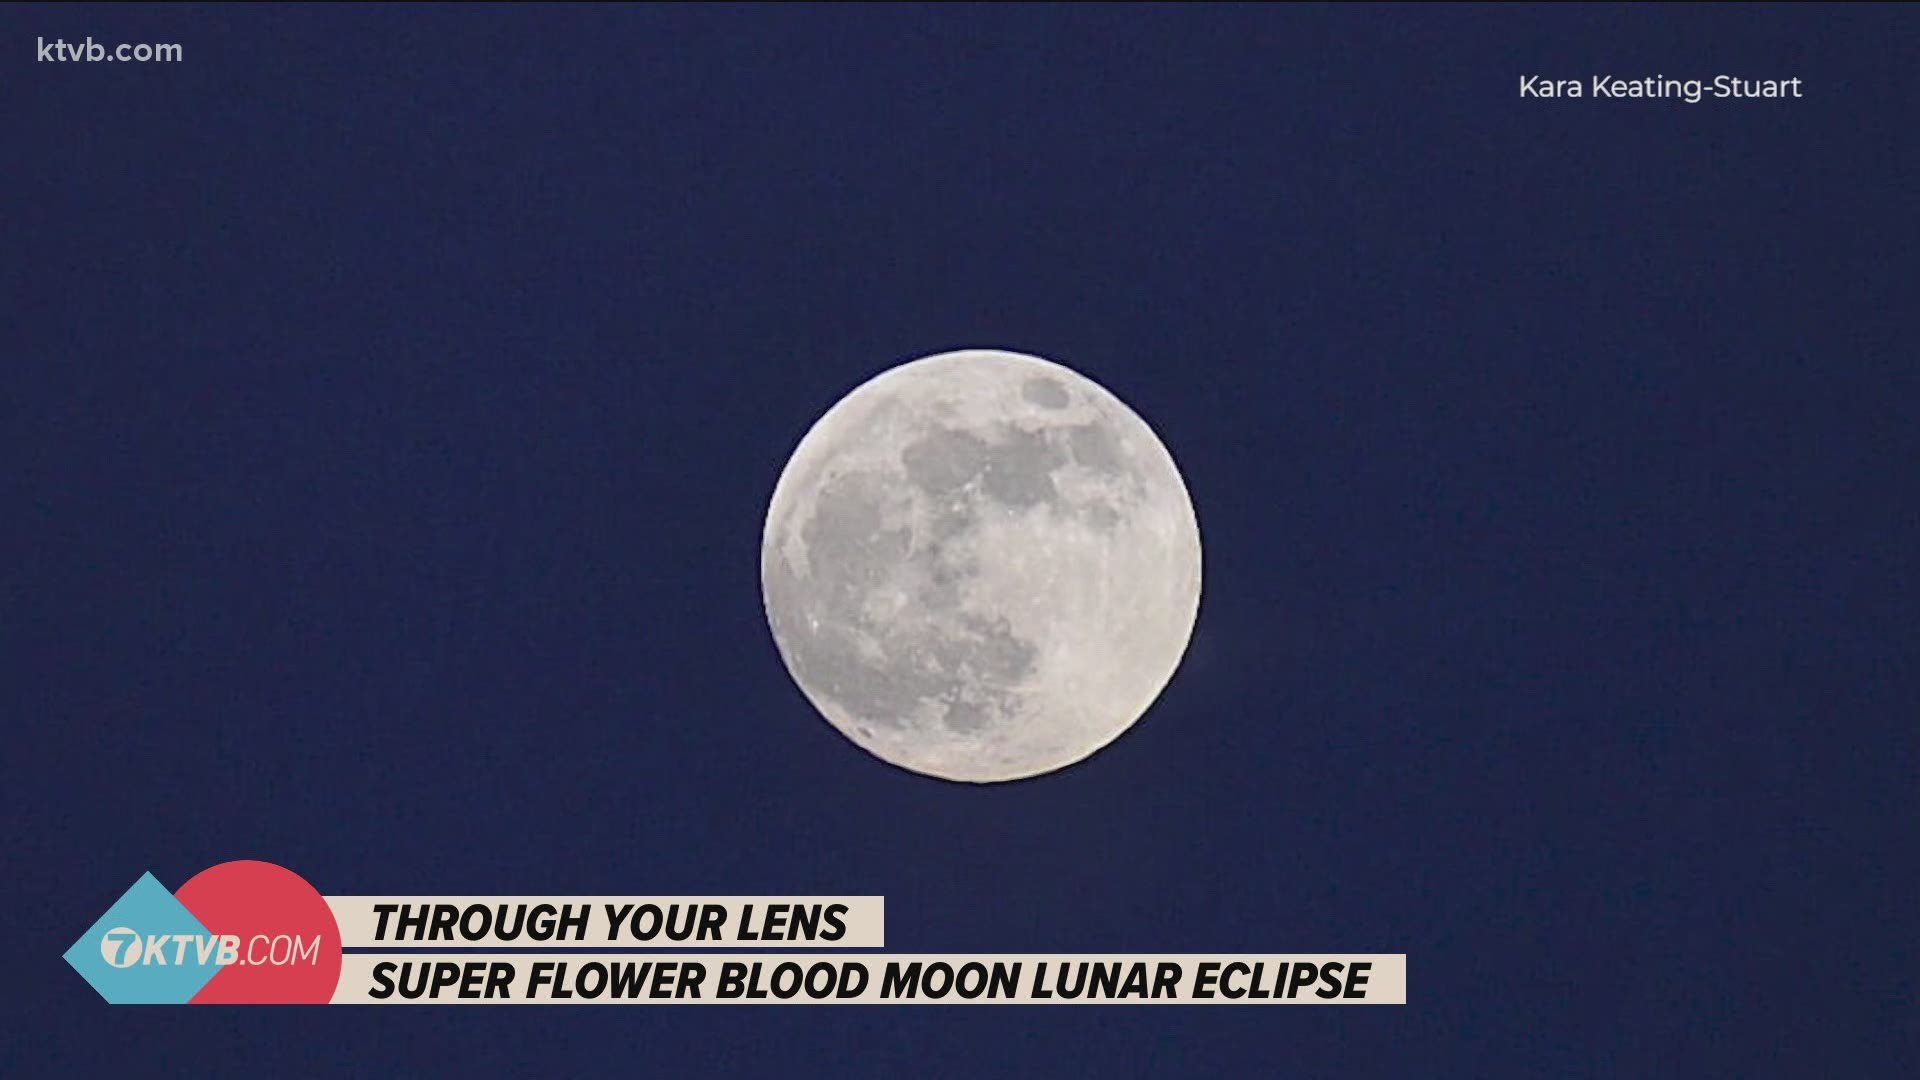 The next total lunar eclipse is in May 2022. In case you missed Wednesday morning's total lunar eclipse, you can see KTVB viewer photos of it.